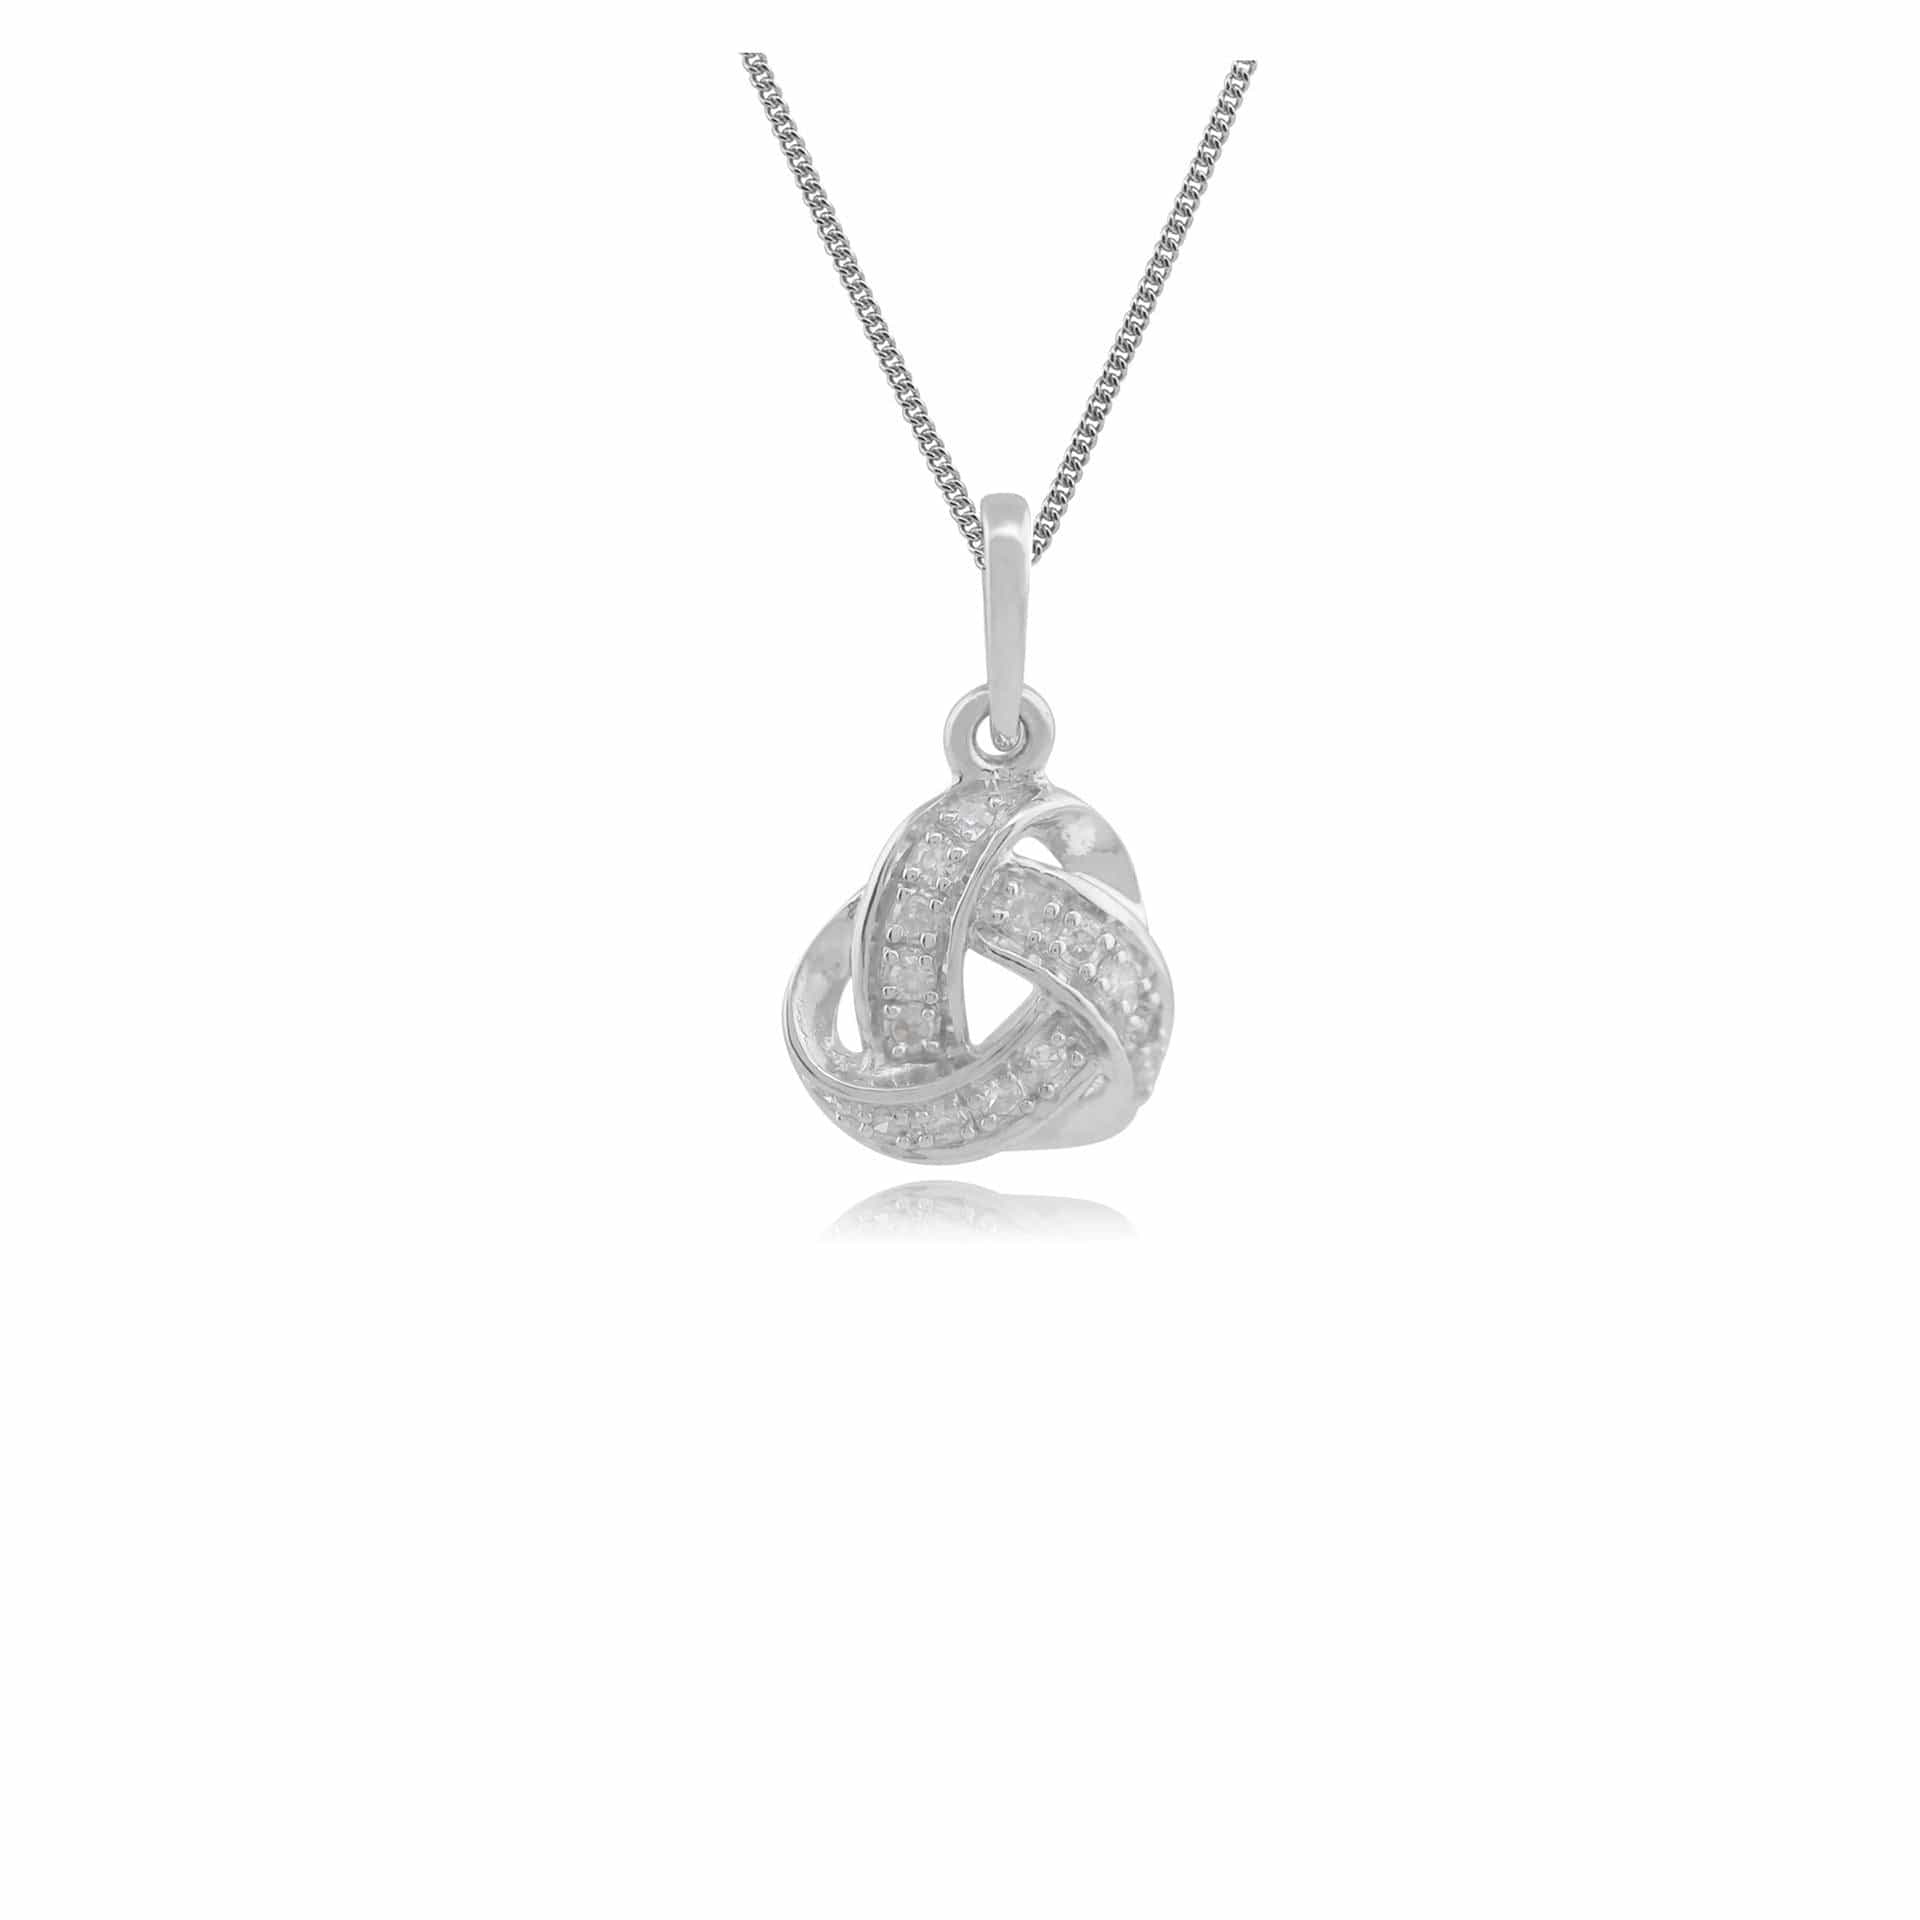 Photos - Pendant / Choker Necklace Classic Round Diamond Love Knot Pendant in 9ct White Gold